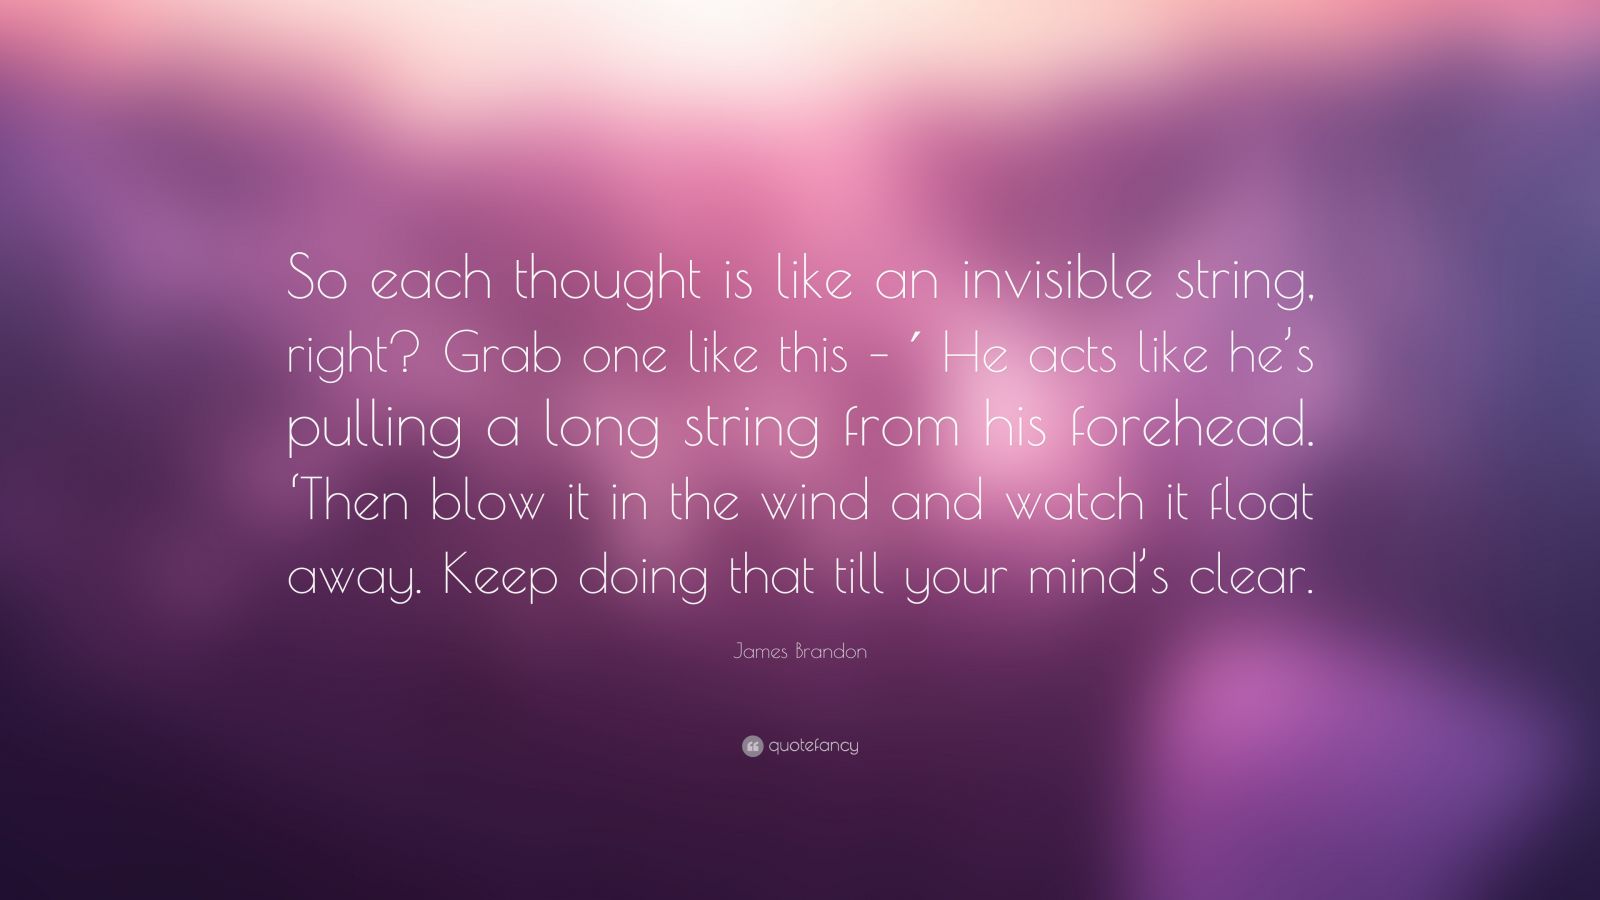 https://quotefancy.com/media/wallpaper/1600x900/7081984-James-Brandon-Quote-So-each-thought-is-like-an-invisible-string.jpg